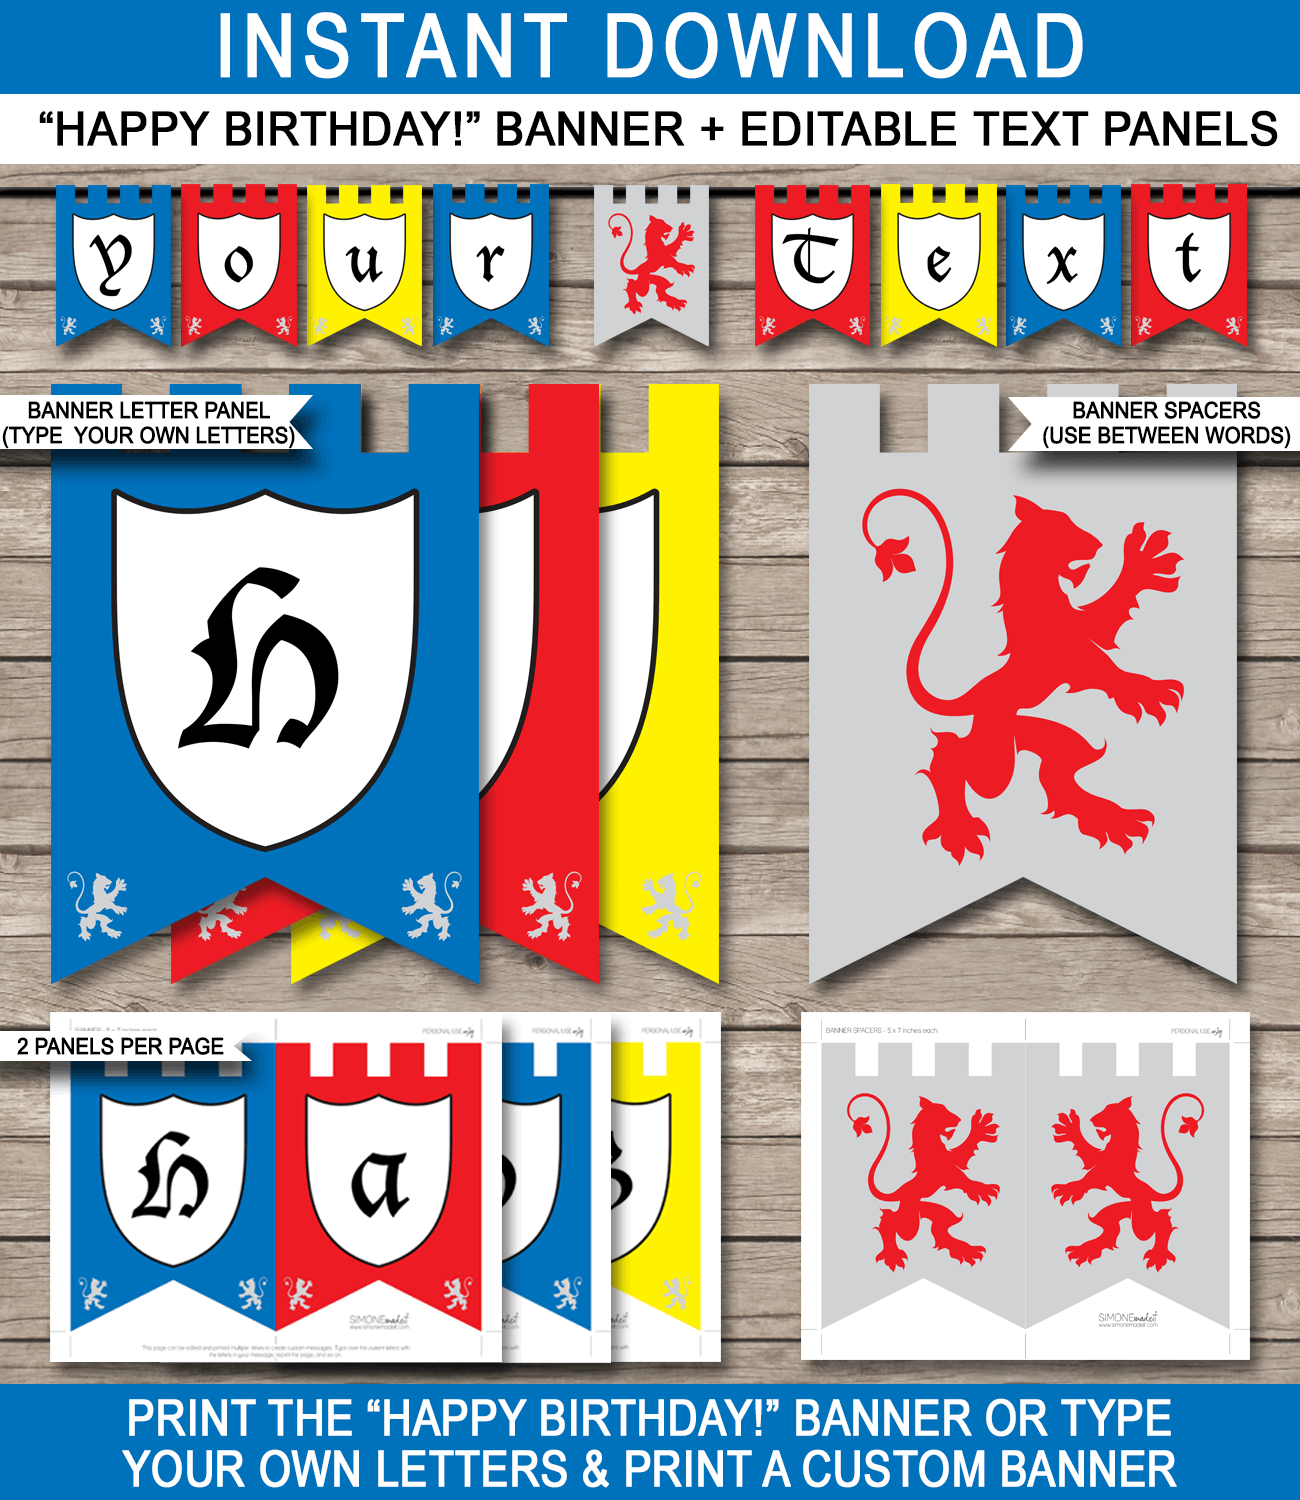 Knight Party Banner Template - Knight Bunting - Happy Birthday Banner - Medieval Knights - Birthday Party - Editable and Printable DIY Template - INSTANT DOWNLOAD $4.50 via simonemadeit.com